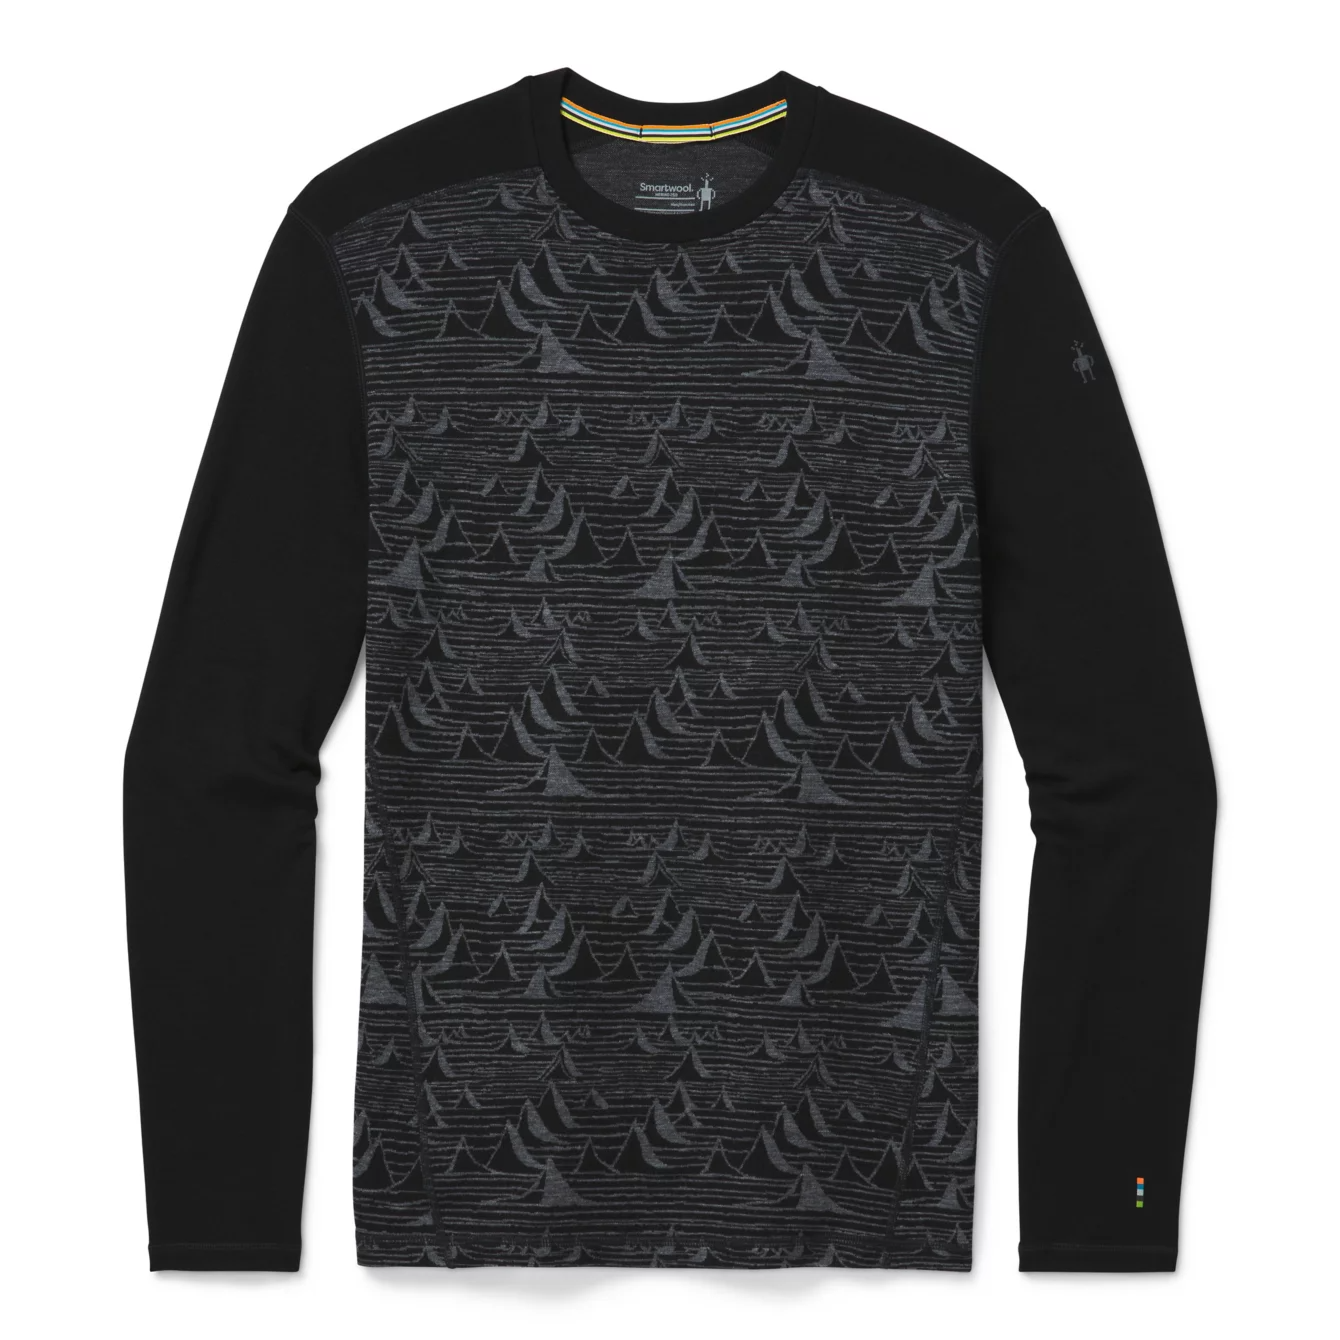 https://activejunky-cdn.s3.amazonaws.com/aj-content/smartwool-Merino-250-Base-Layer-Pattern-Crew-1.png